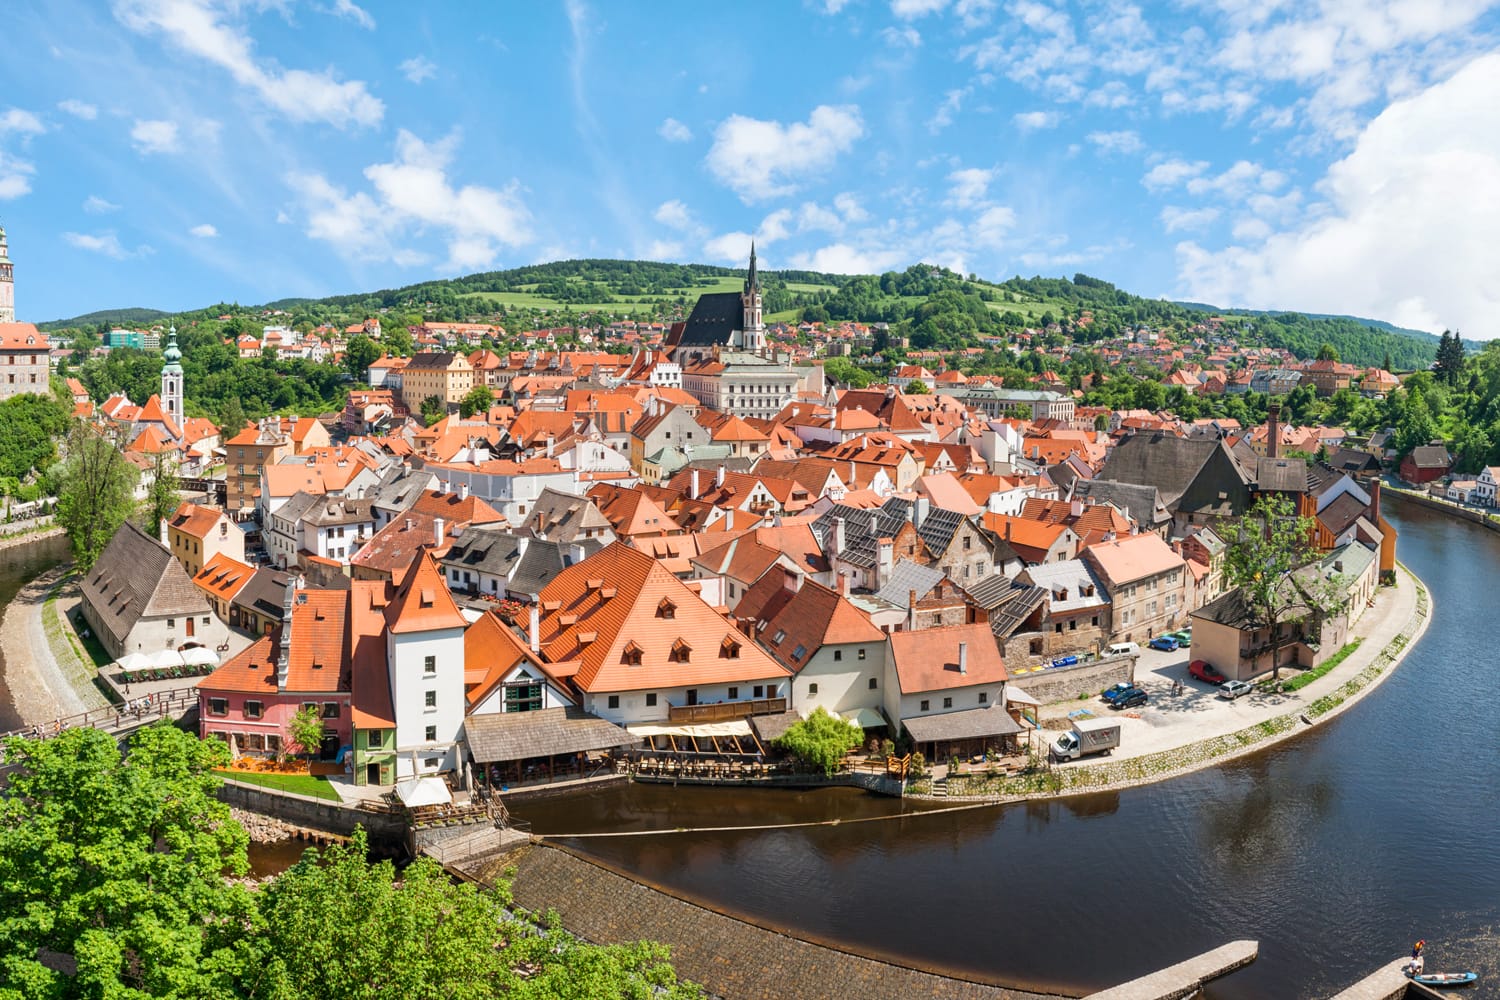 Panorama of the historical part of Cesky Krumlov with Castle and Church of St. Vitius, Czech Republic